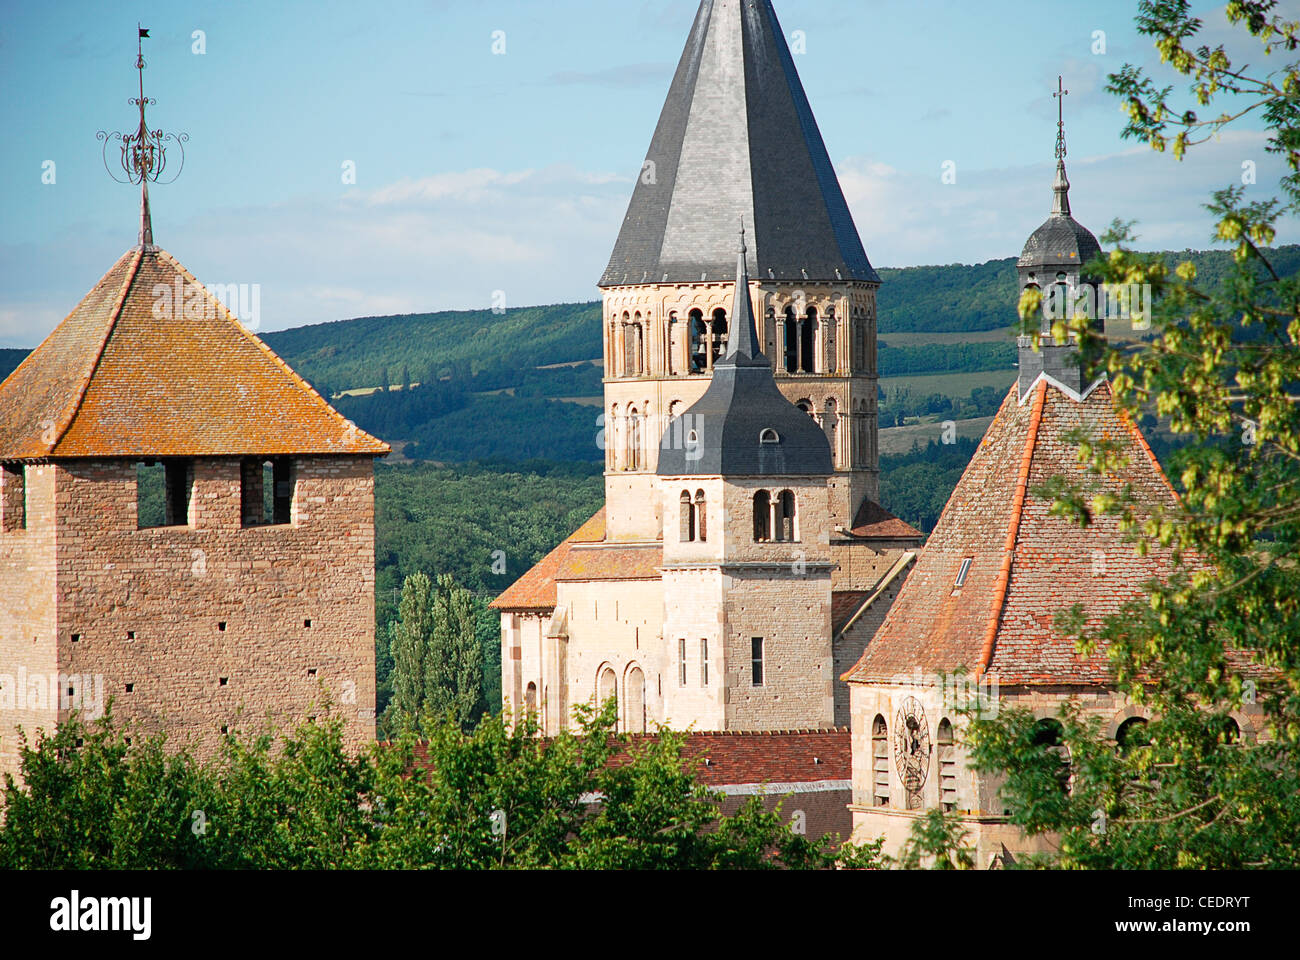 France, Burgundy, Cluny, Cluny Abbey, towers and steeples Stock Photo